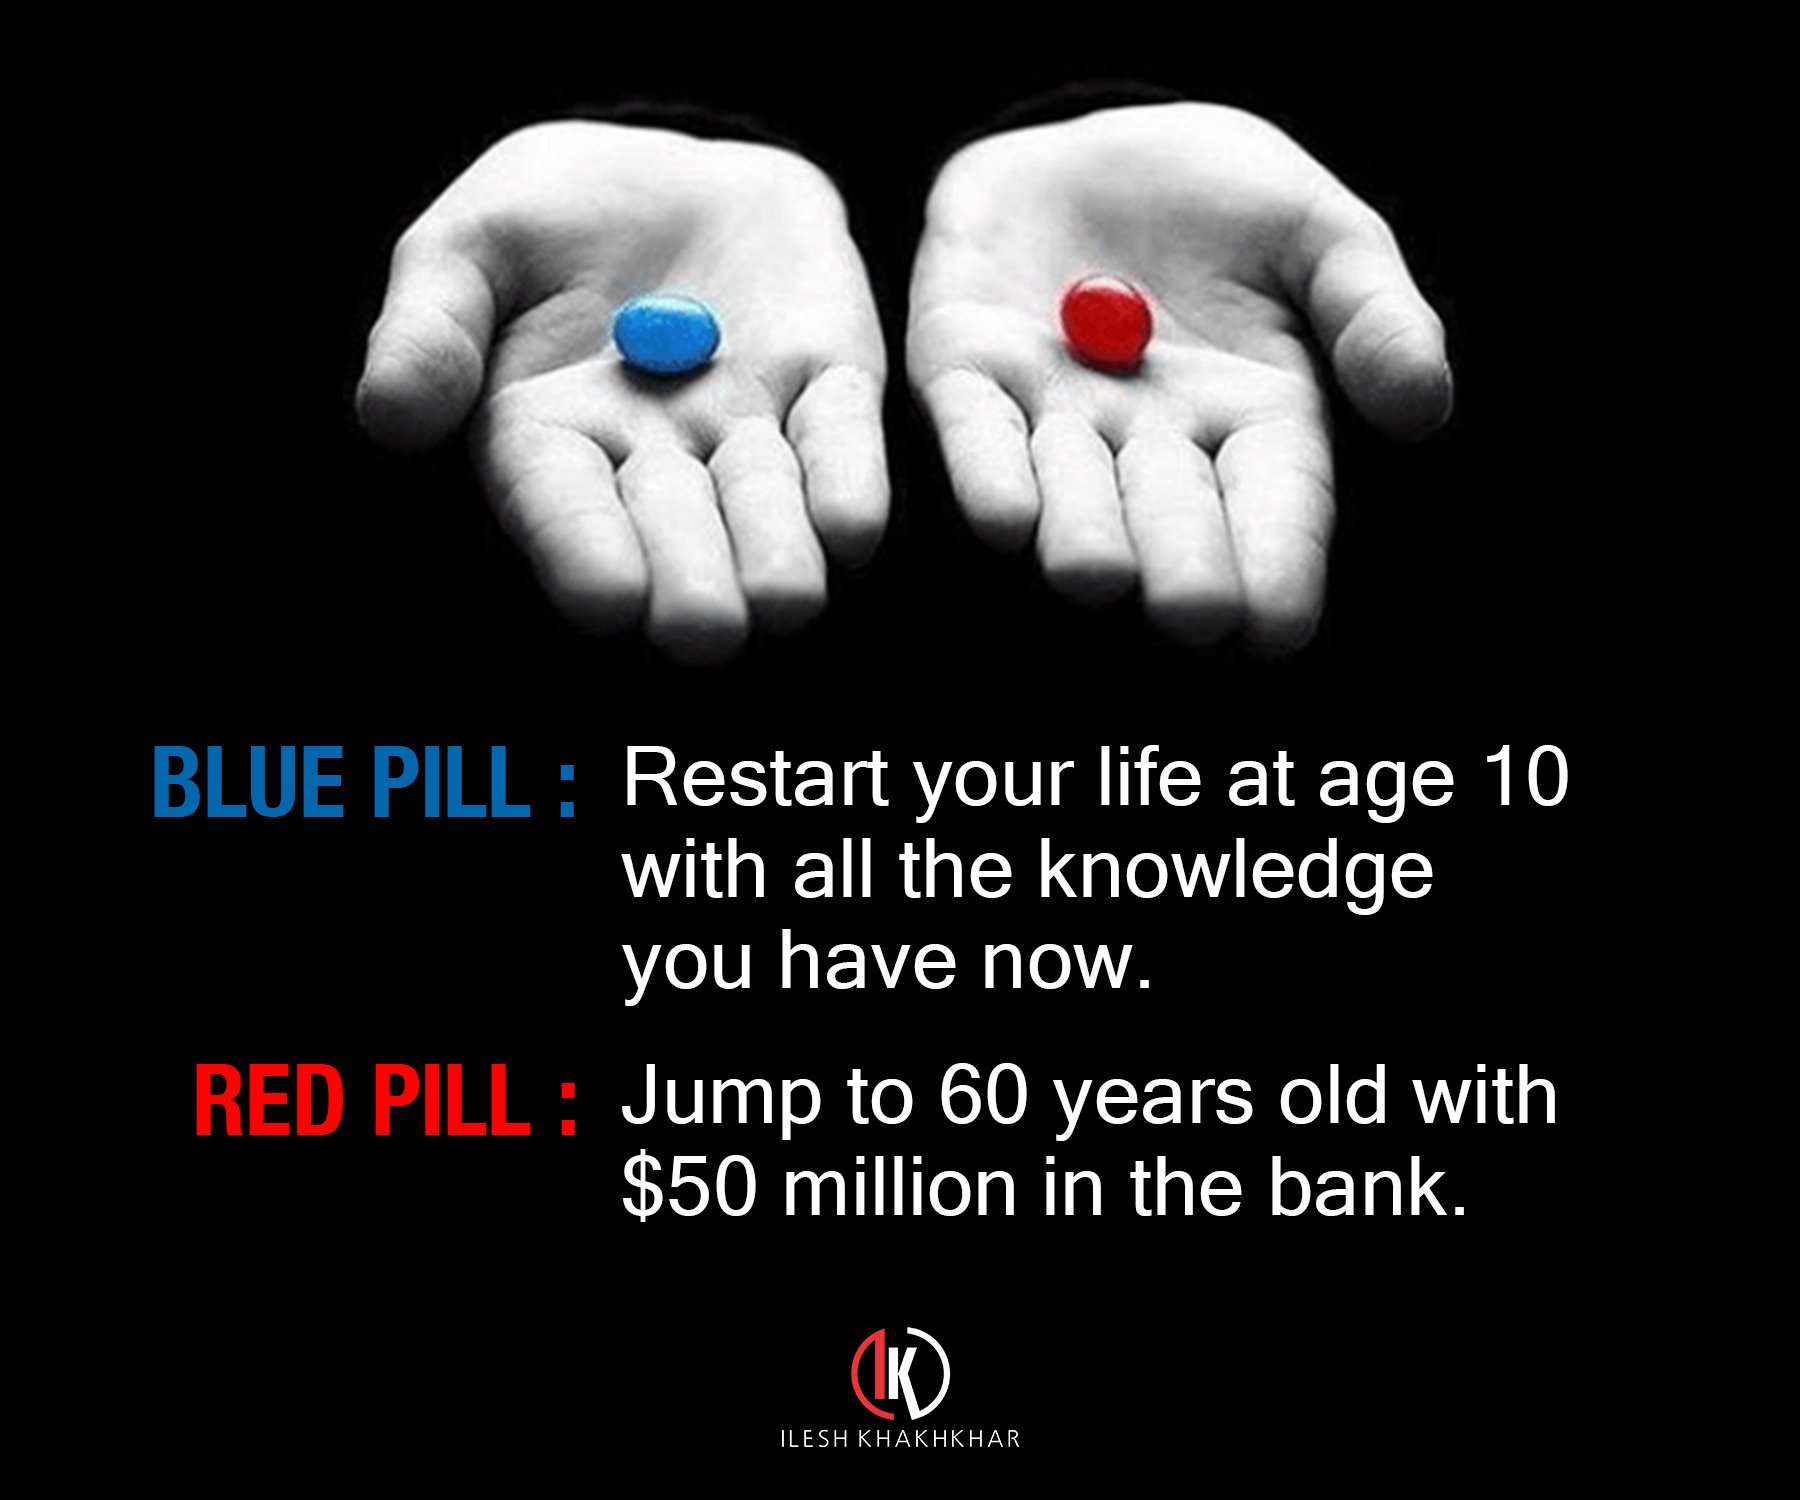 Ilesh Khakhkhar on Twitter: "Which pill would you Blue pill or Red #ik #wednesdaywisdom #wednesdaymotivation #quote #lifequote #entrepreneur #quoteoftheday https://t.co/jy7y1sq0Cu" /